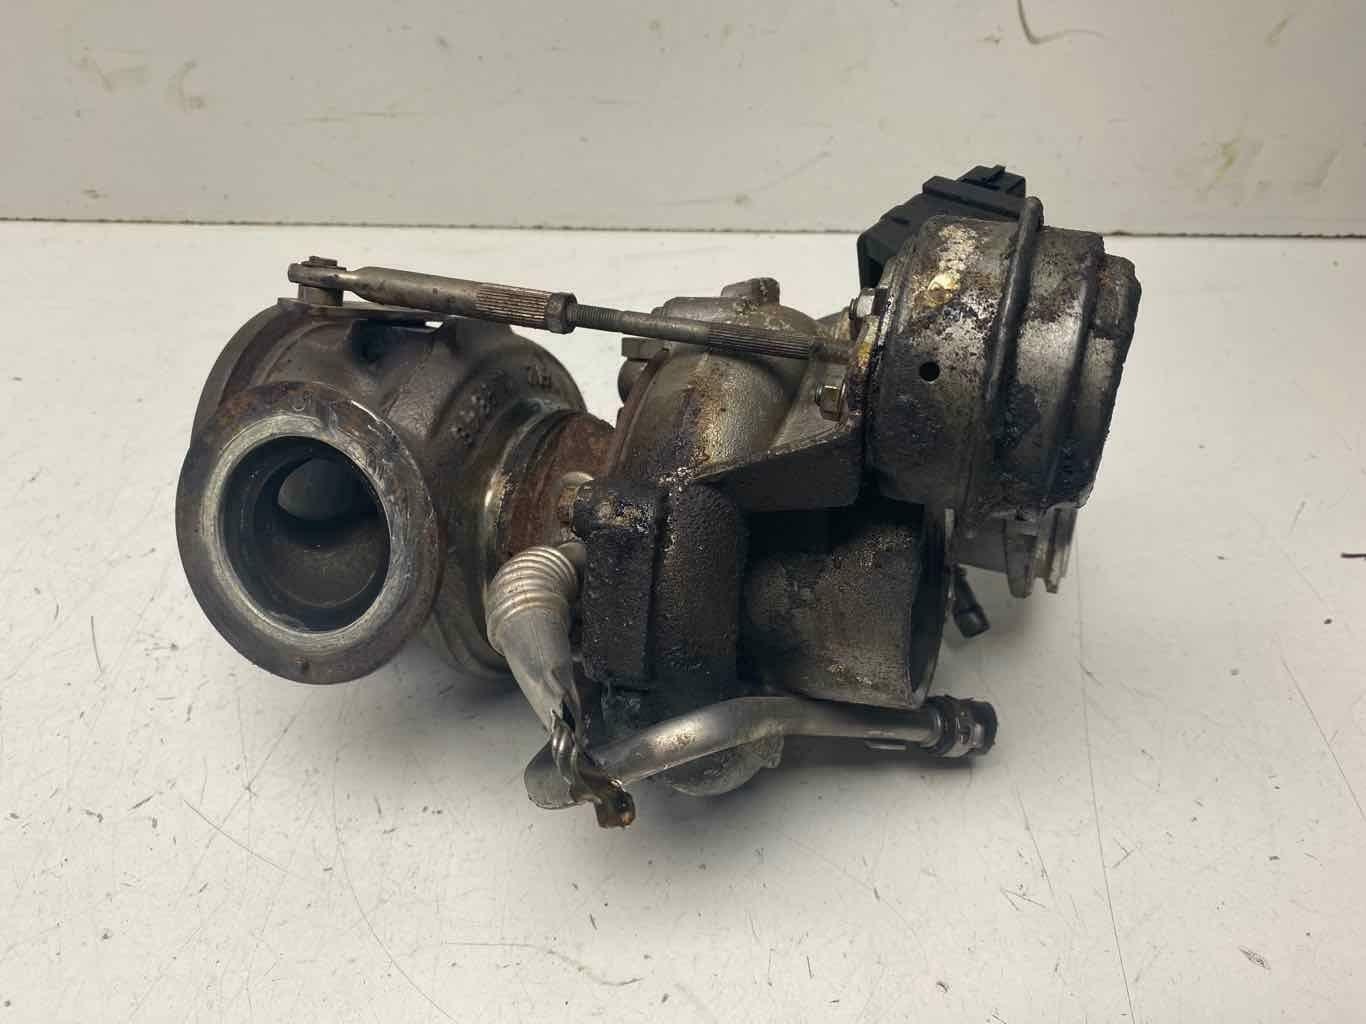 Turbo/supercharger BMW 750 SERIES 09 10 11 12